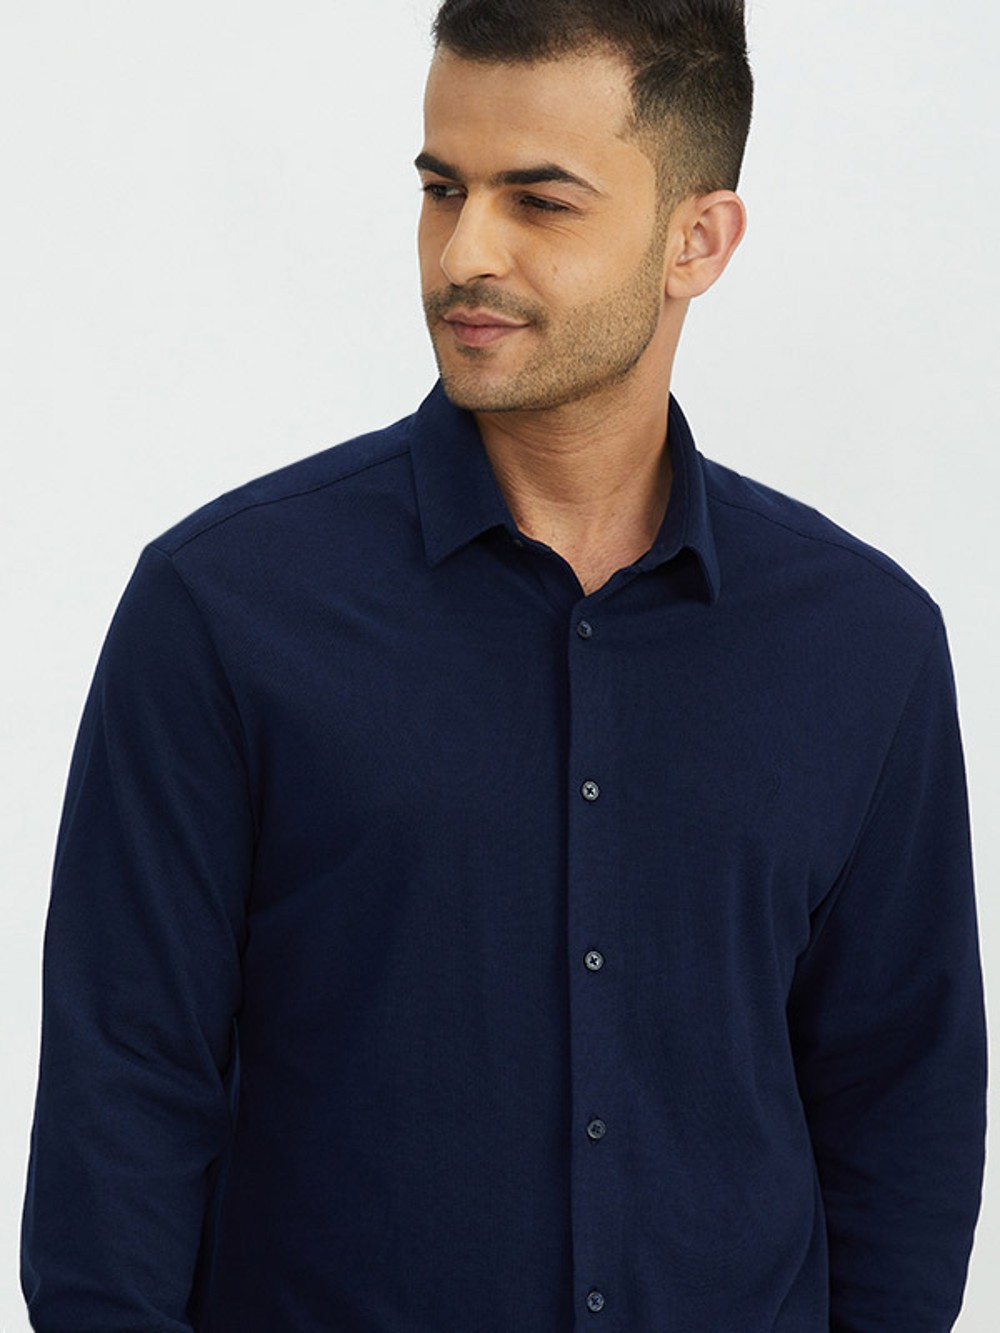 Buy Men Blue Classic Fit Solid Full Sleeves Formal Shirt Online